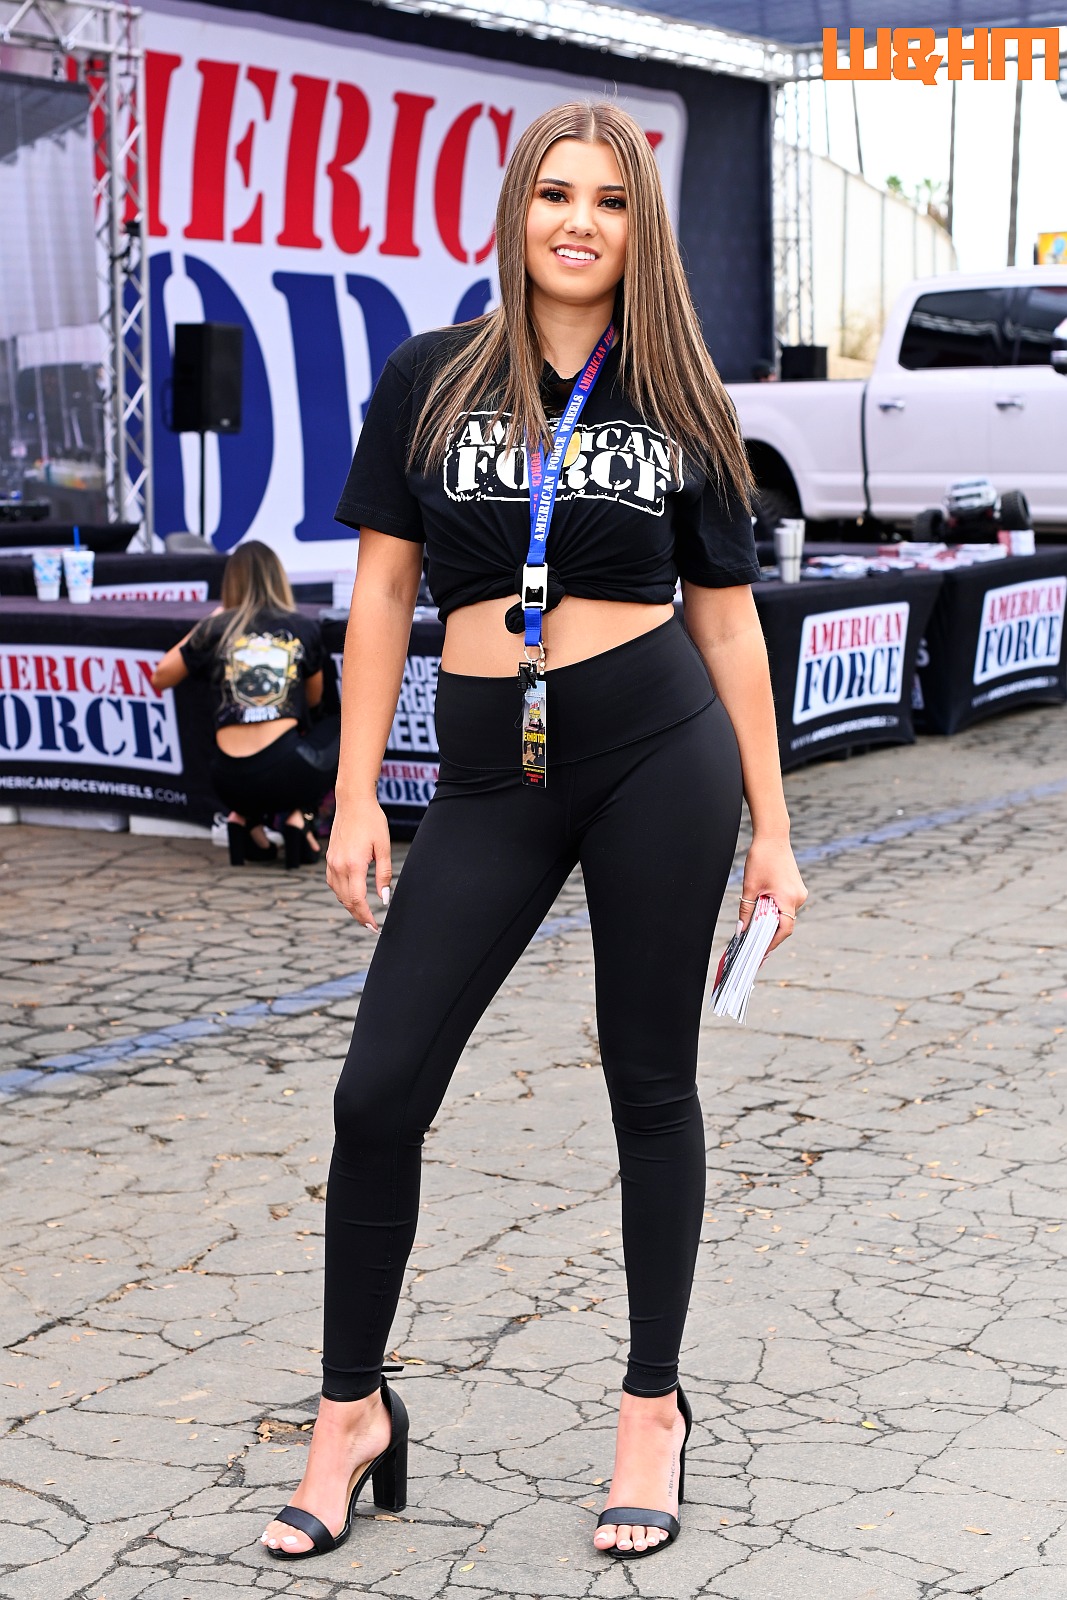 Cute Carmen Maria for American Force Wheels at Off Road Expo 2019 ...